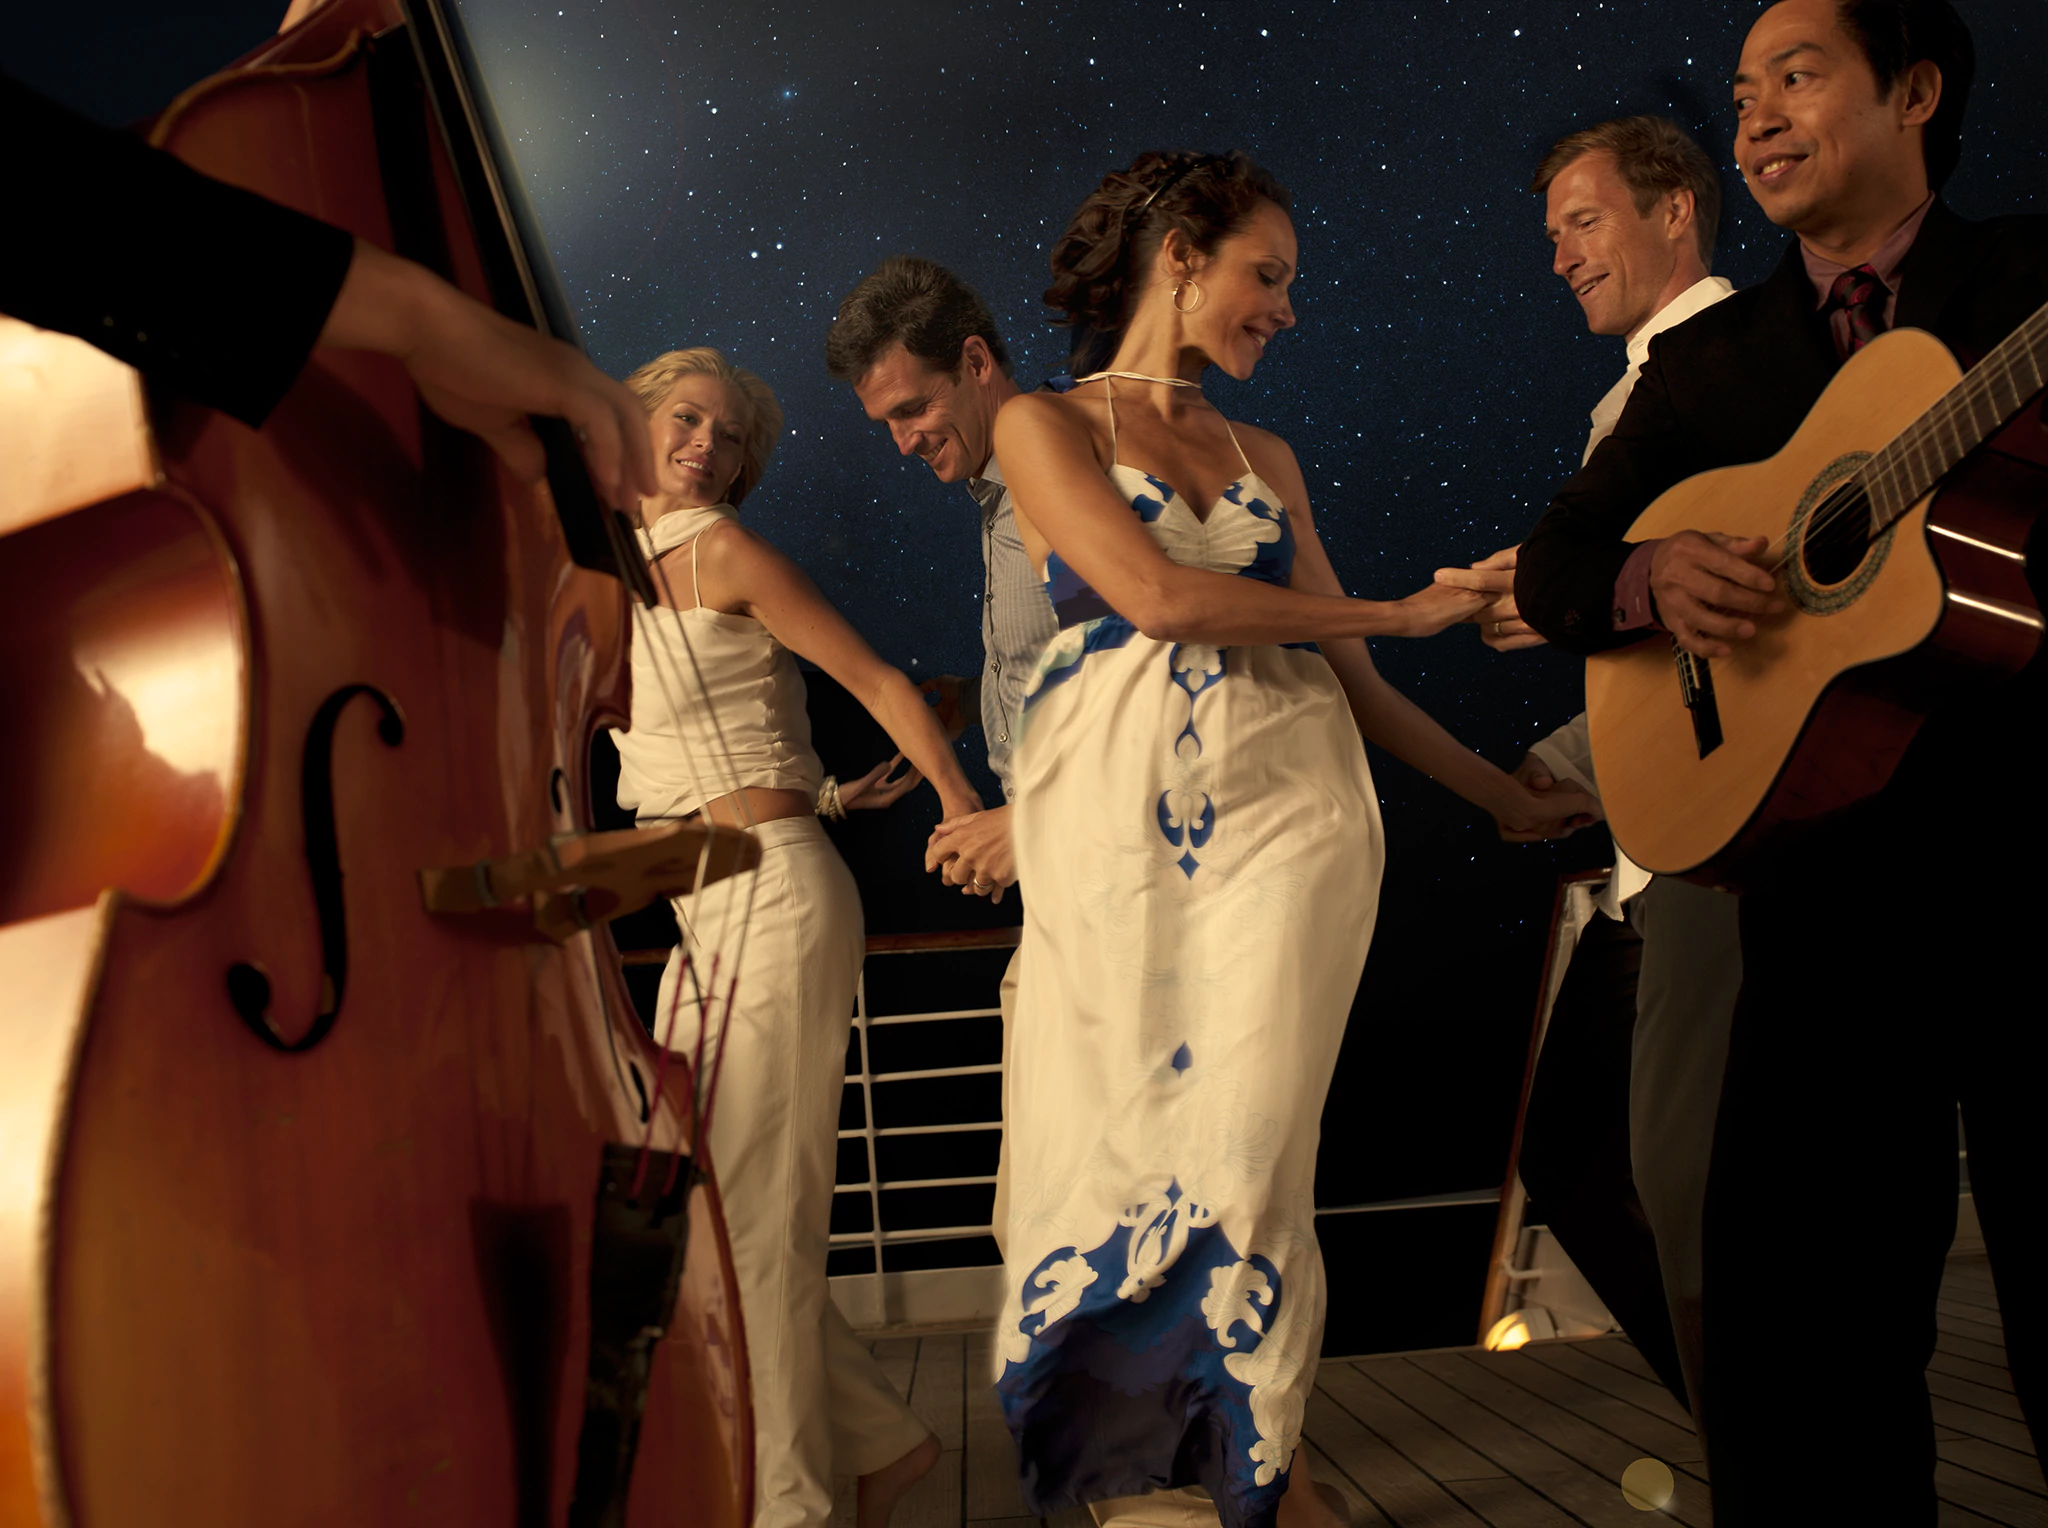 Dancing under the stars on deck, couples are laughing.